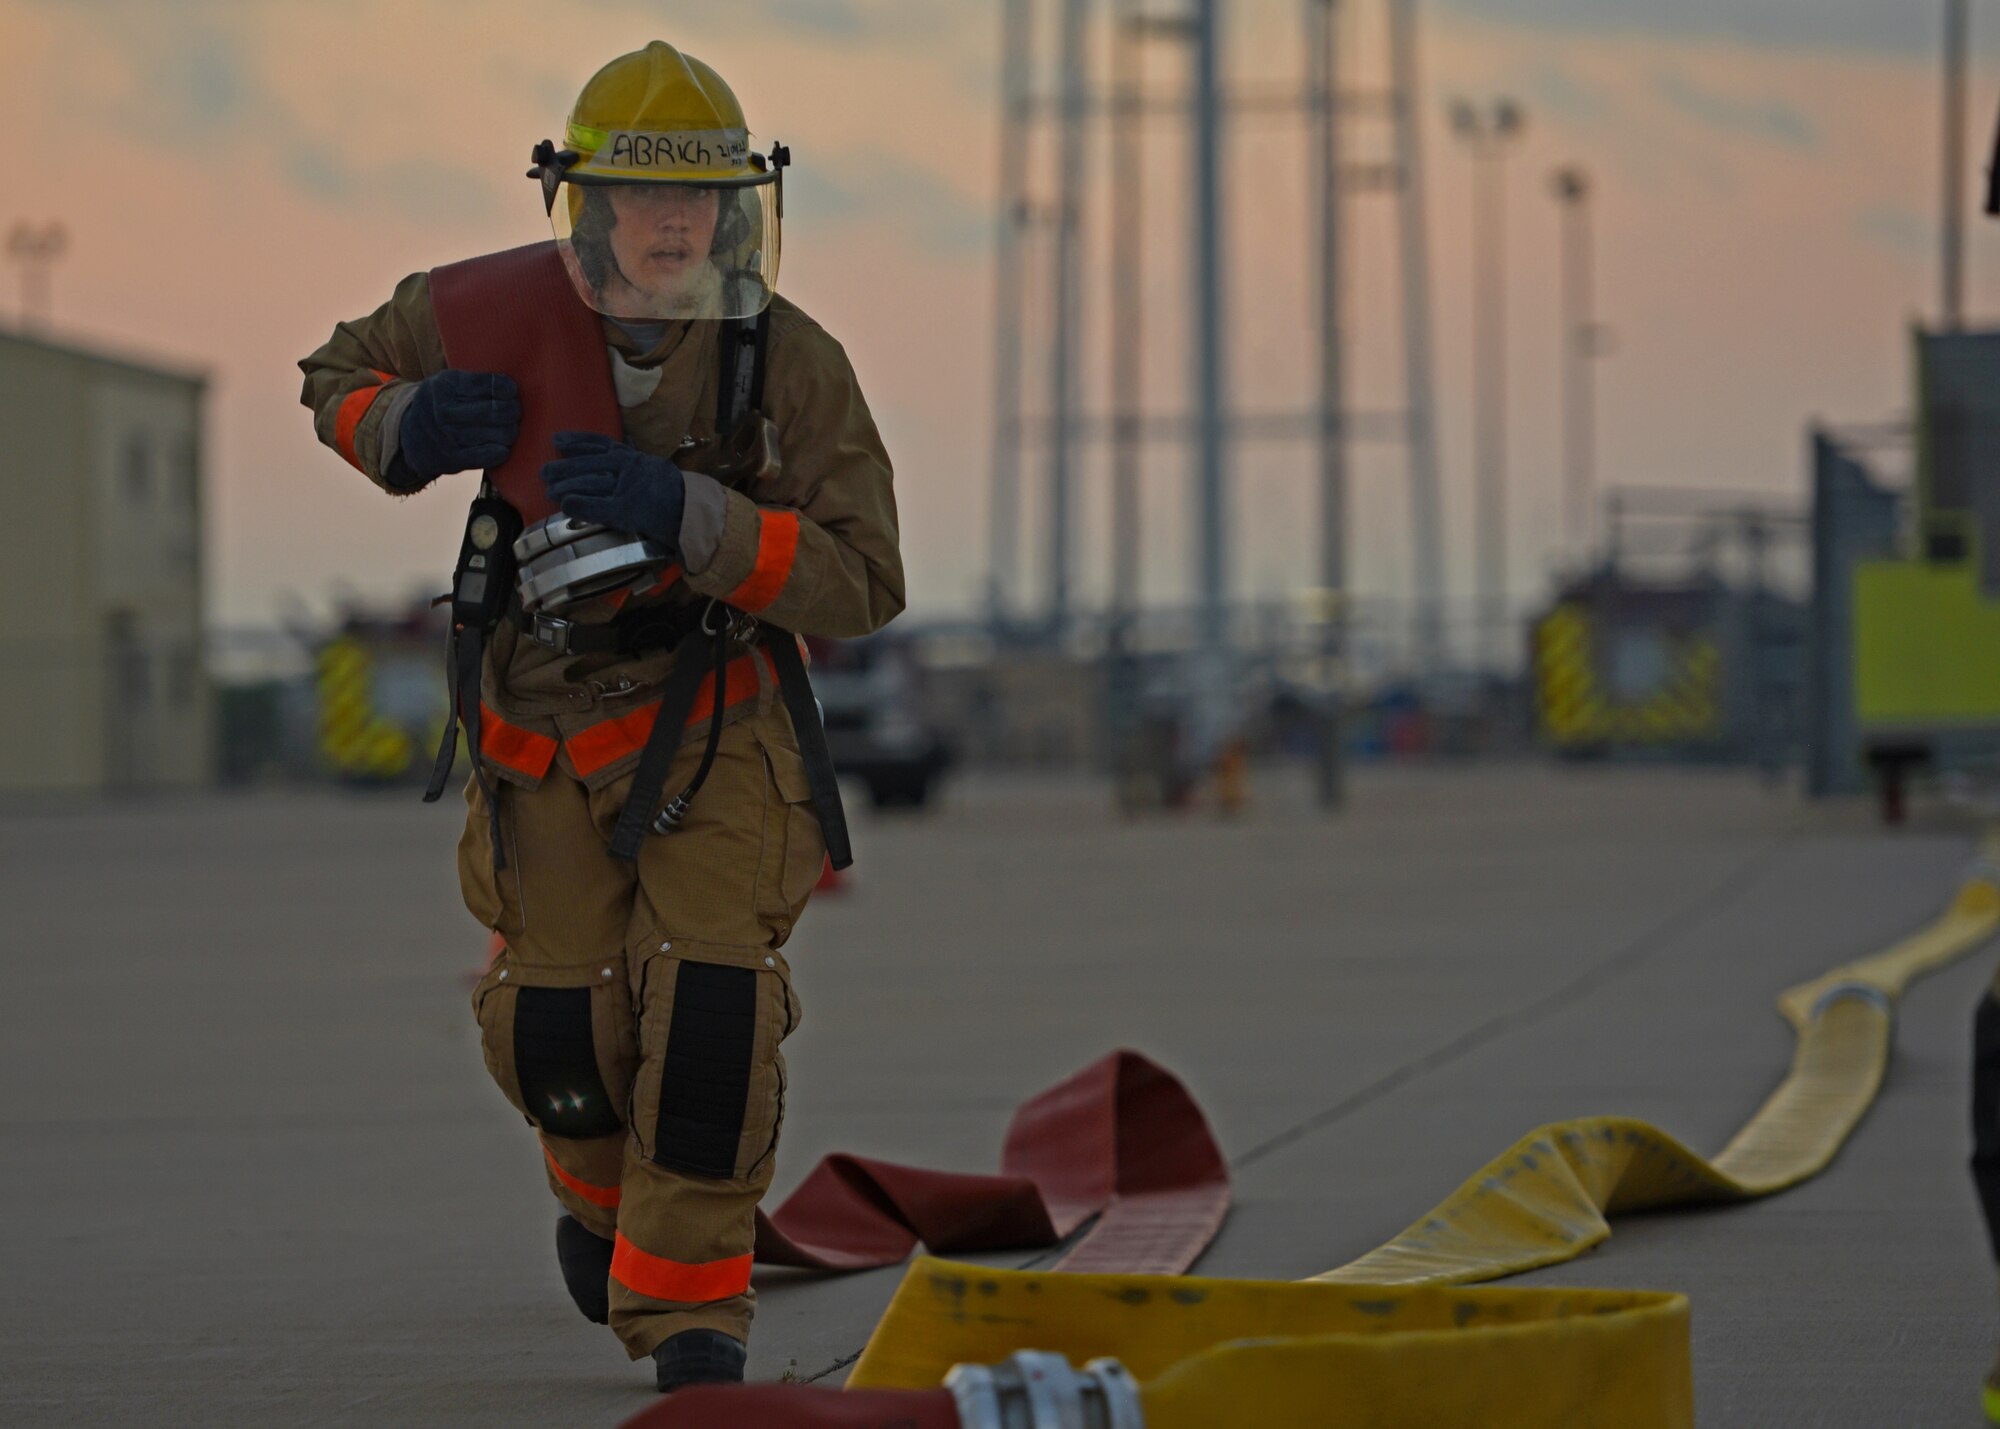 U.S. Air Force Airman Elijah Rich, 312th Training Squadron student, sprints with a fire hose during a training exercise on Goodfellow Air Force Base, Texas, June 11, 2021. The students go through a 68-day course, training and preparing to handle emergencies across the world. (U.S. Air Force photo by Senior Airman Abbey Rieves)